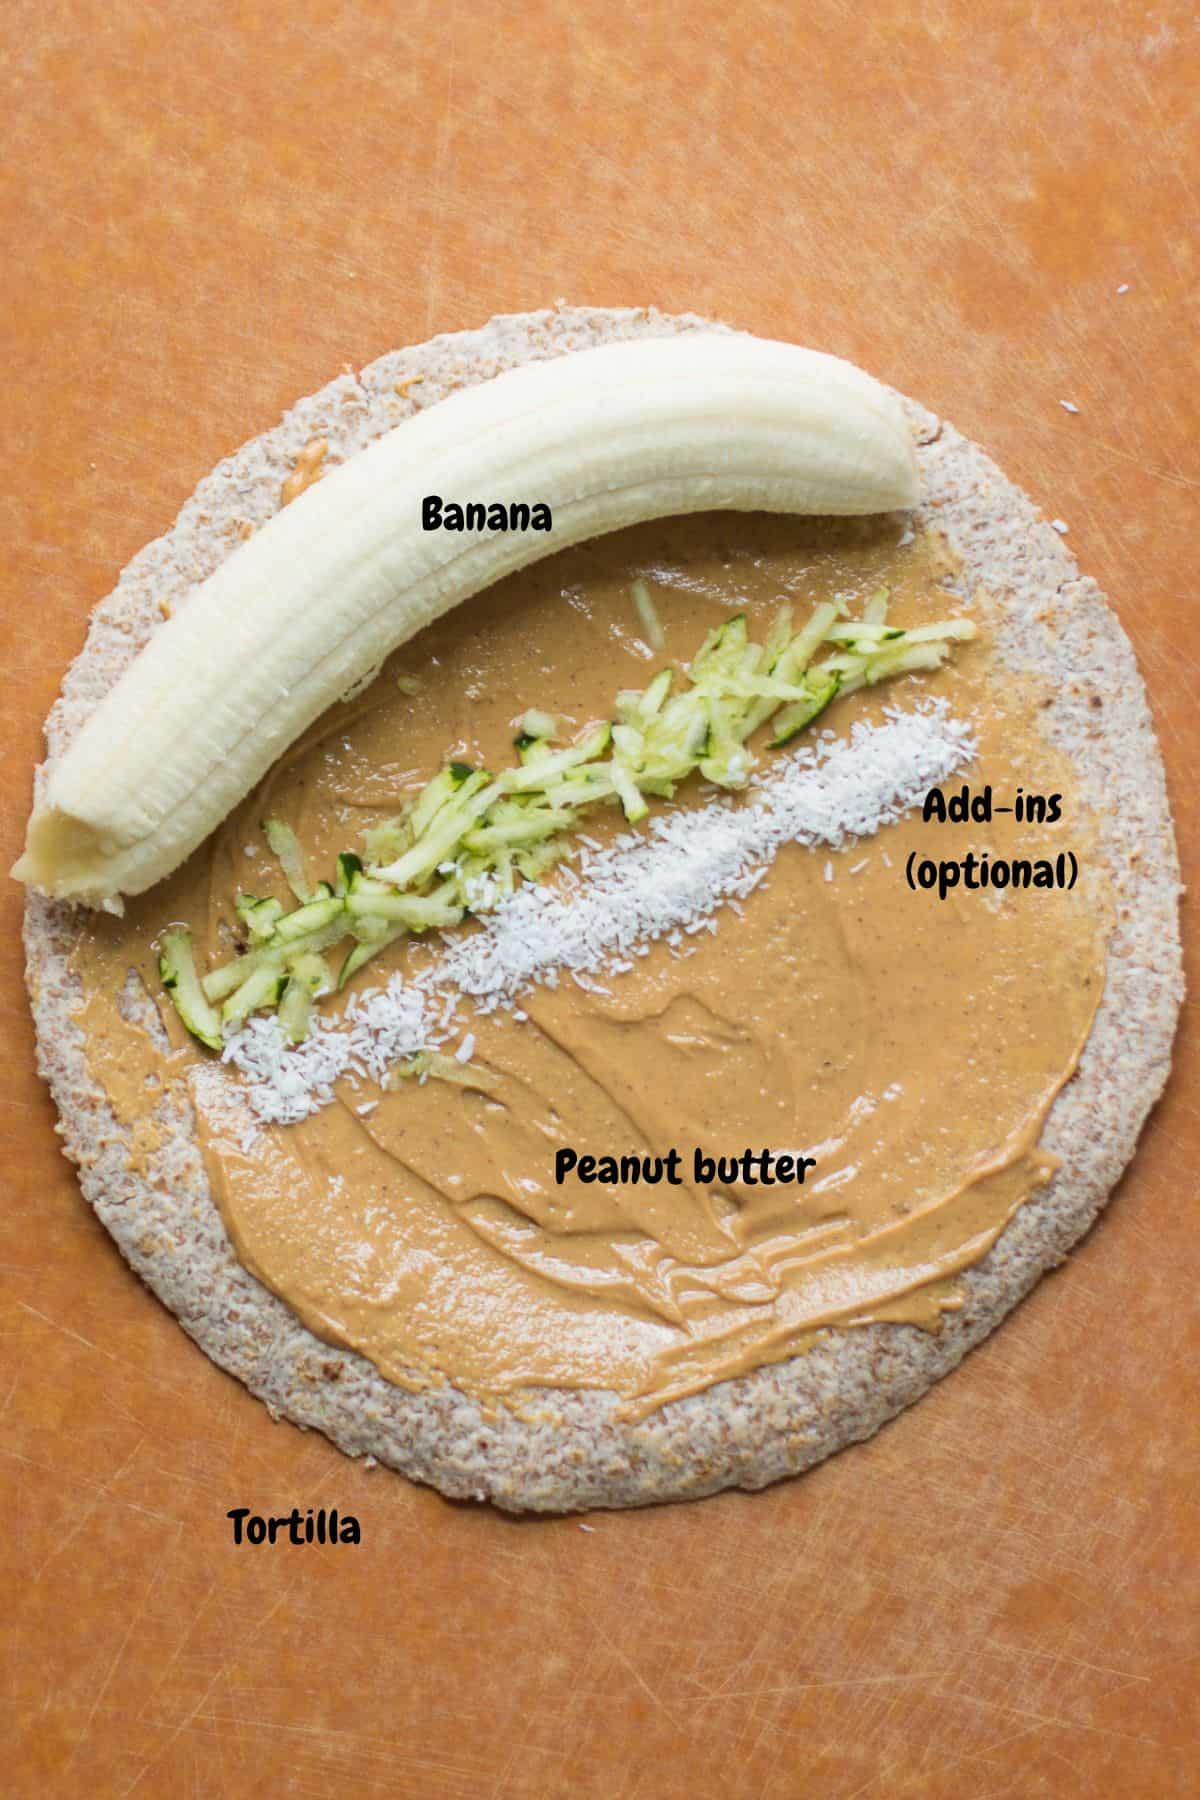 Peanut butter spread onto tortilla with banana, carrots, and coconut flakes.